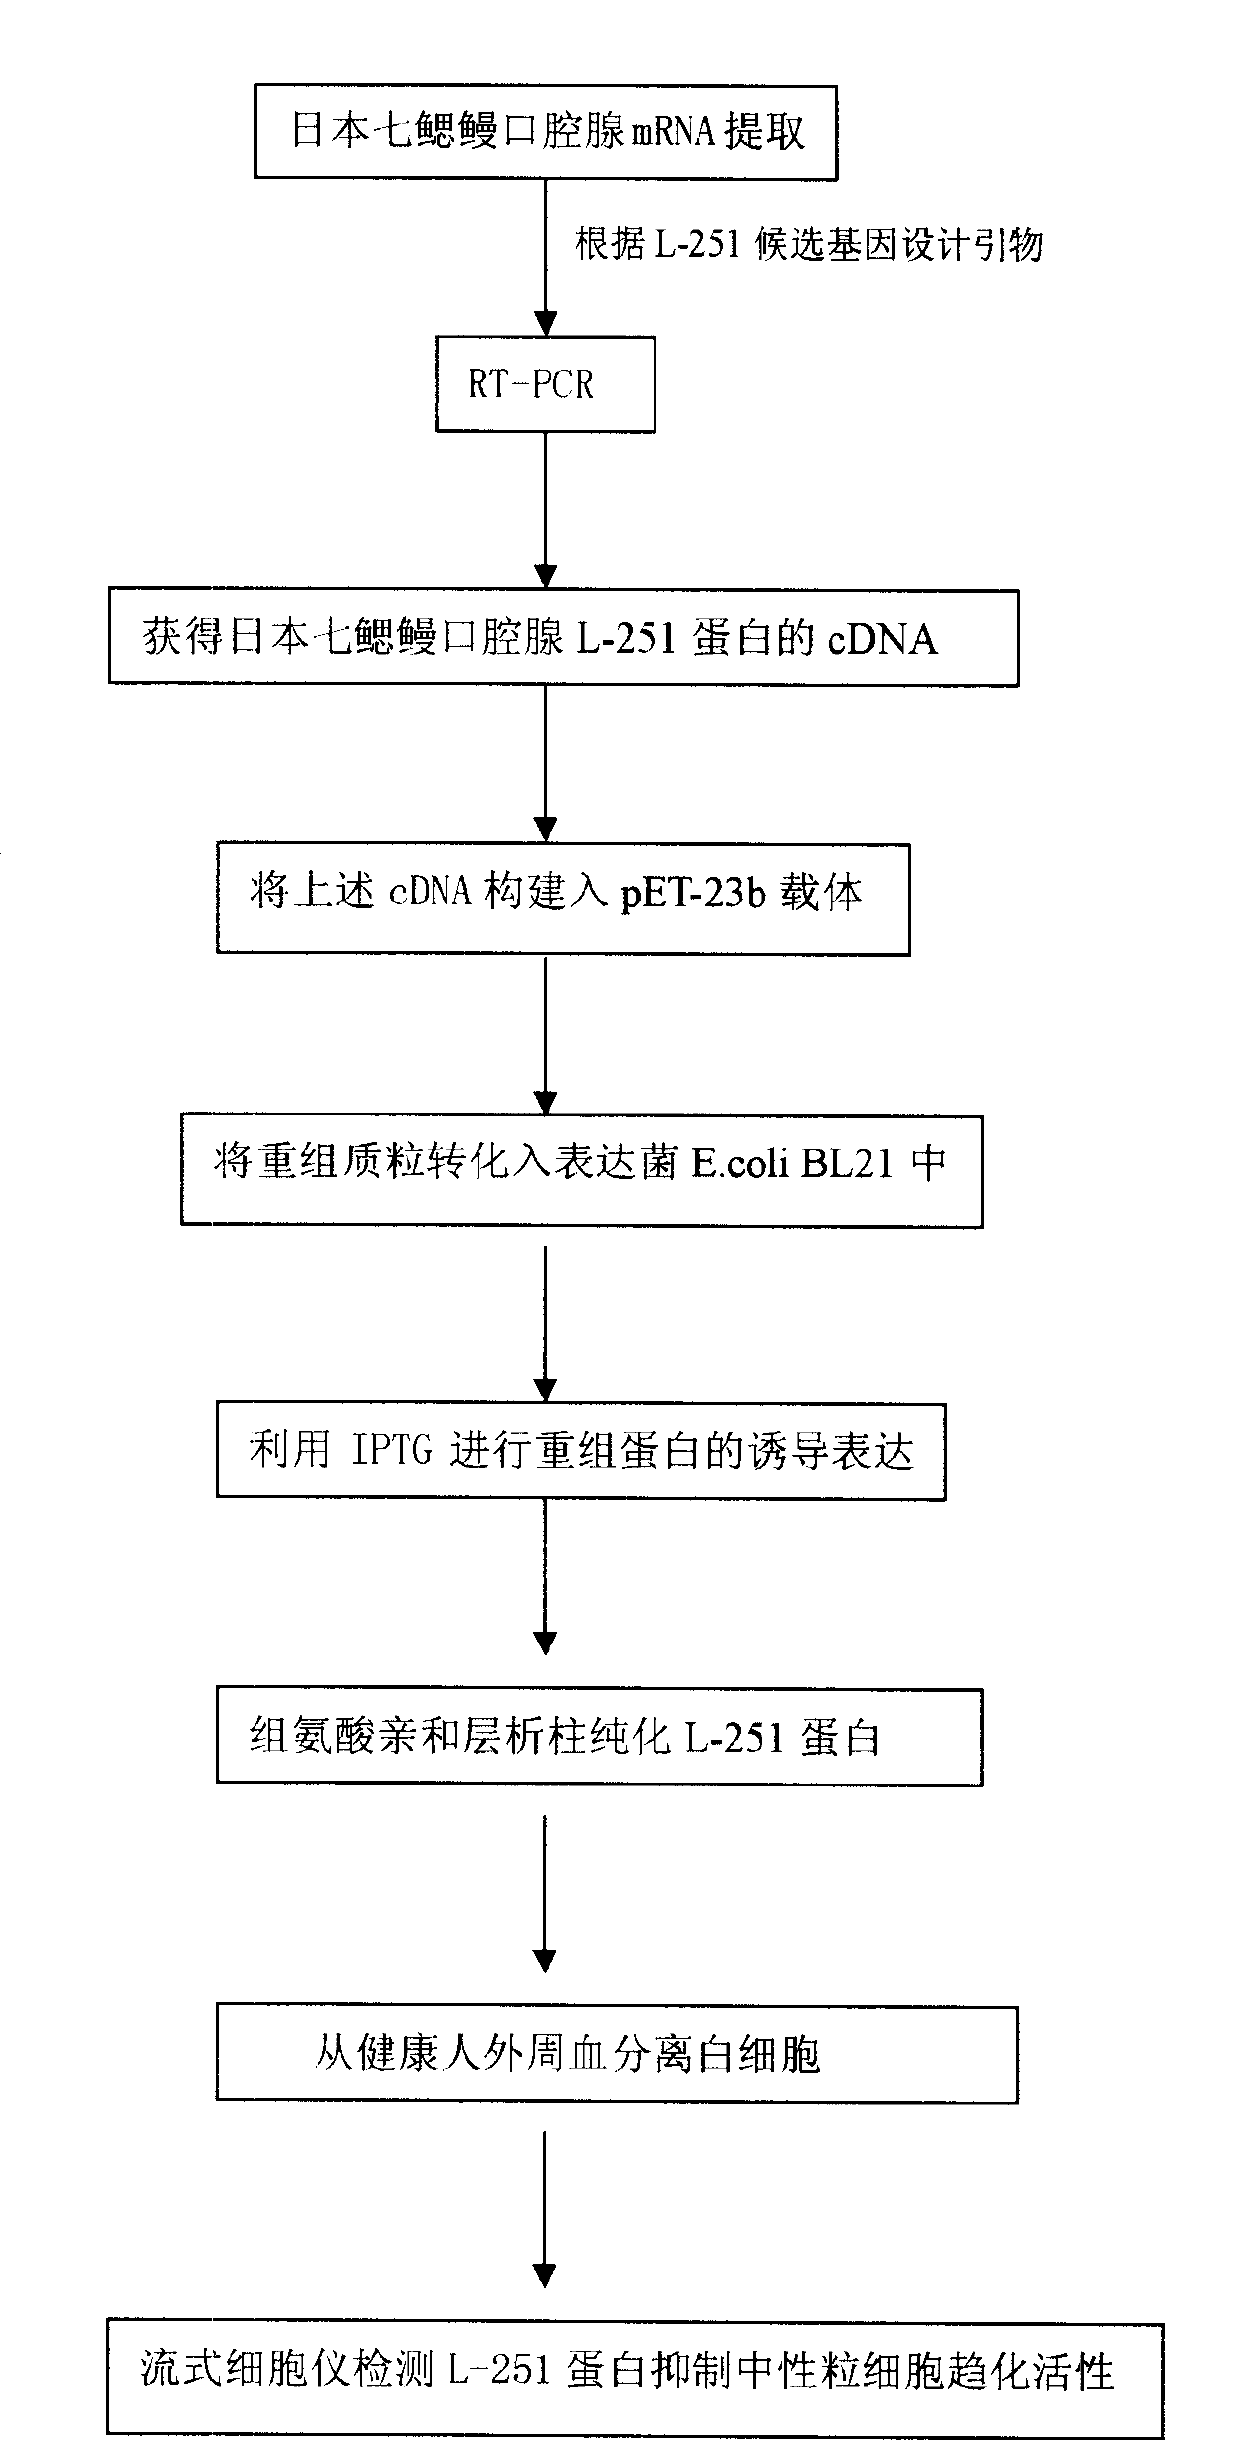 Recombinant L-251 protein with anti-inflammatory effect secreted by Japanese lamprey oral gland